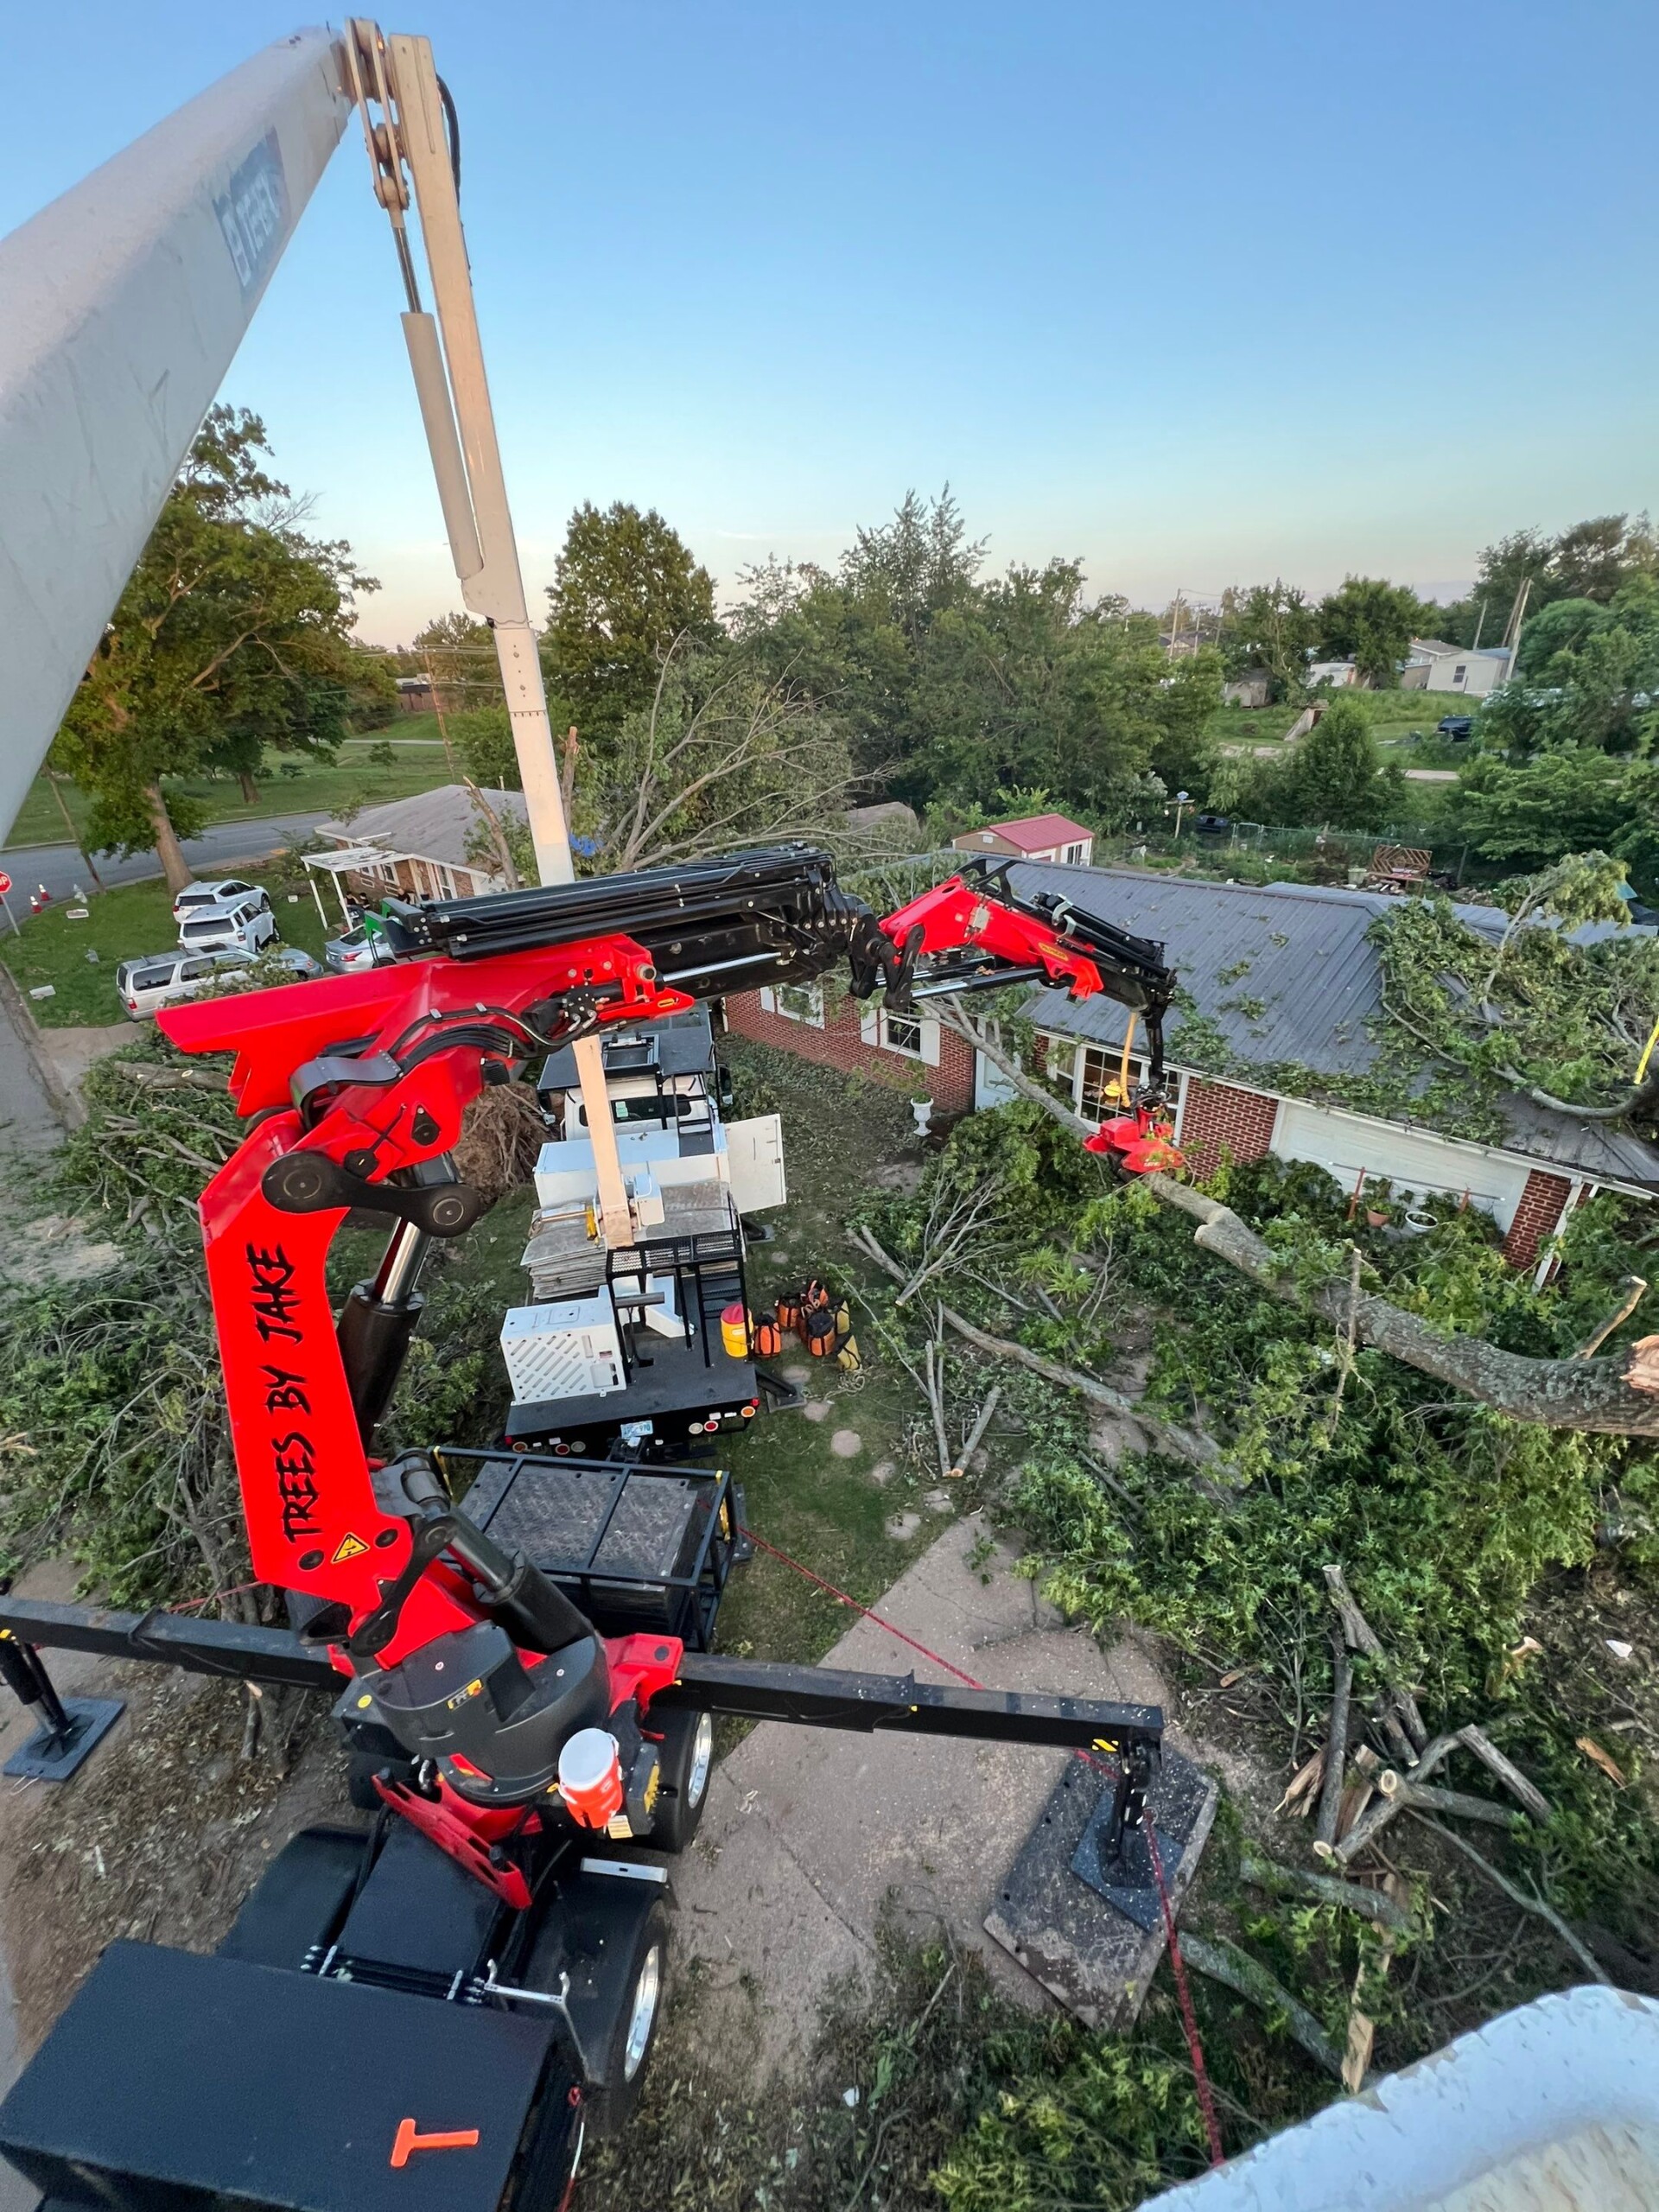 A red crane truck with extended arm cuts and removes large tree branches near a residential house, with fallen branches scattered on the ground.